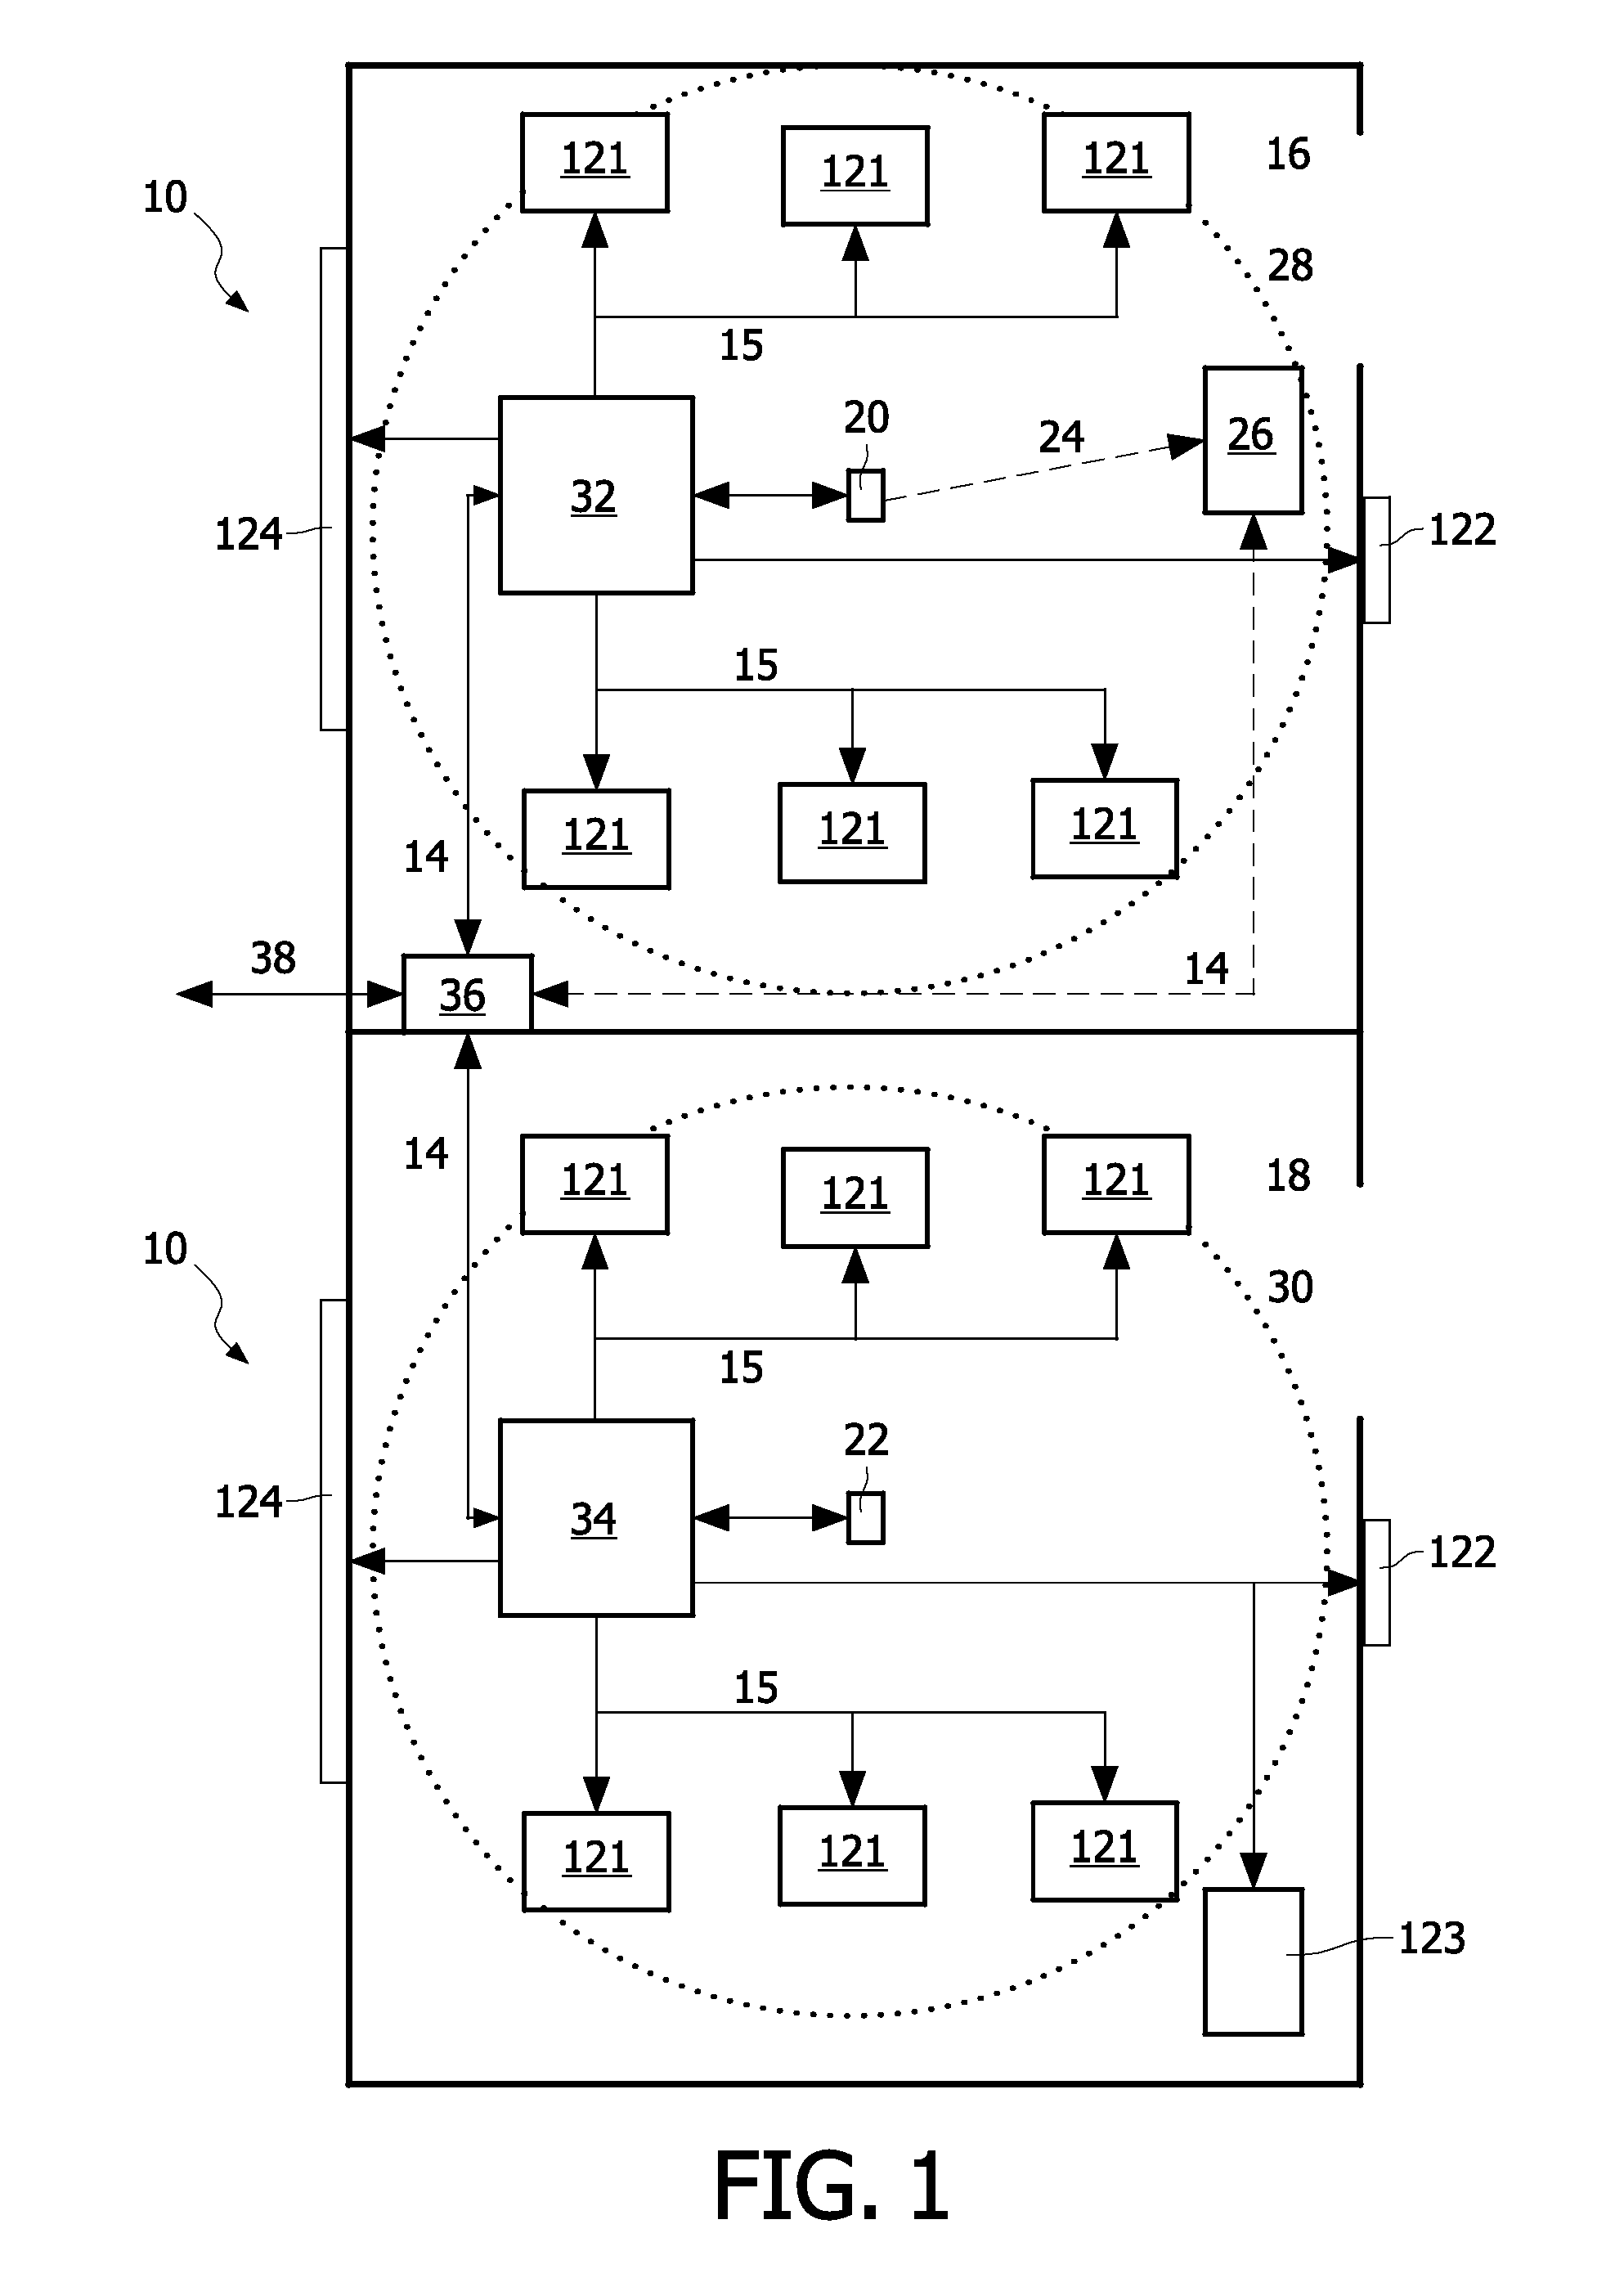 System and method for controlling the access to a networked control system